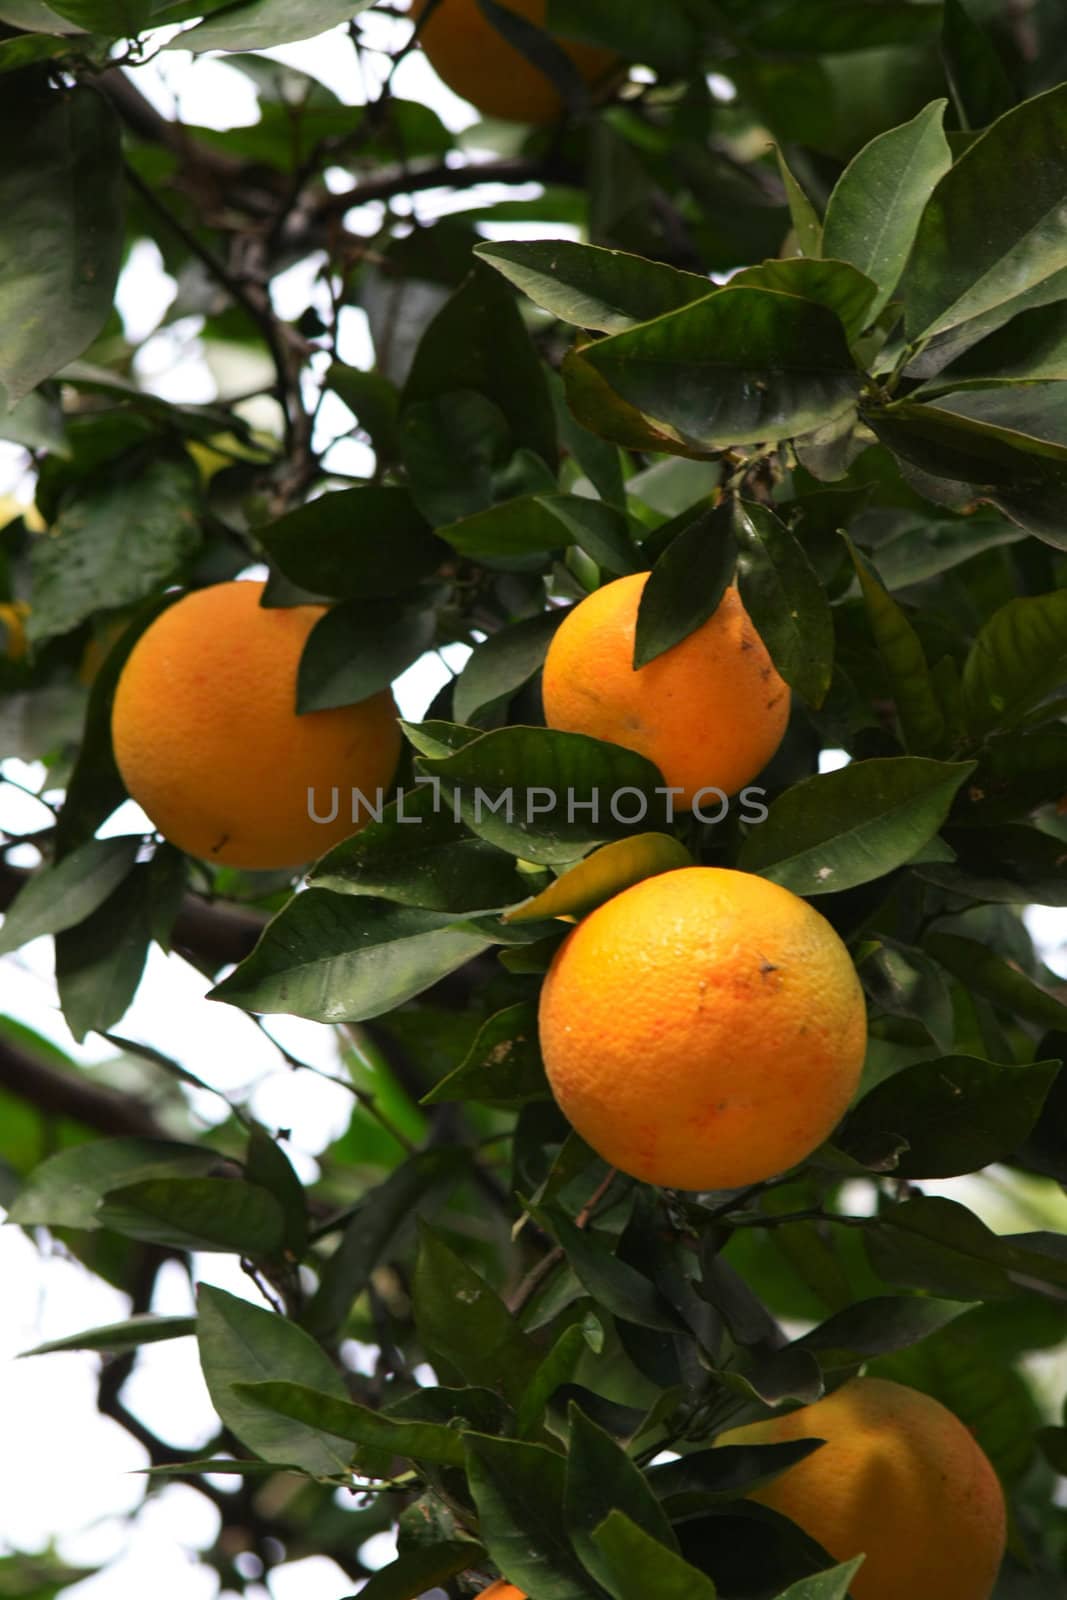 A couple of big oranges in a loaded tree